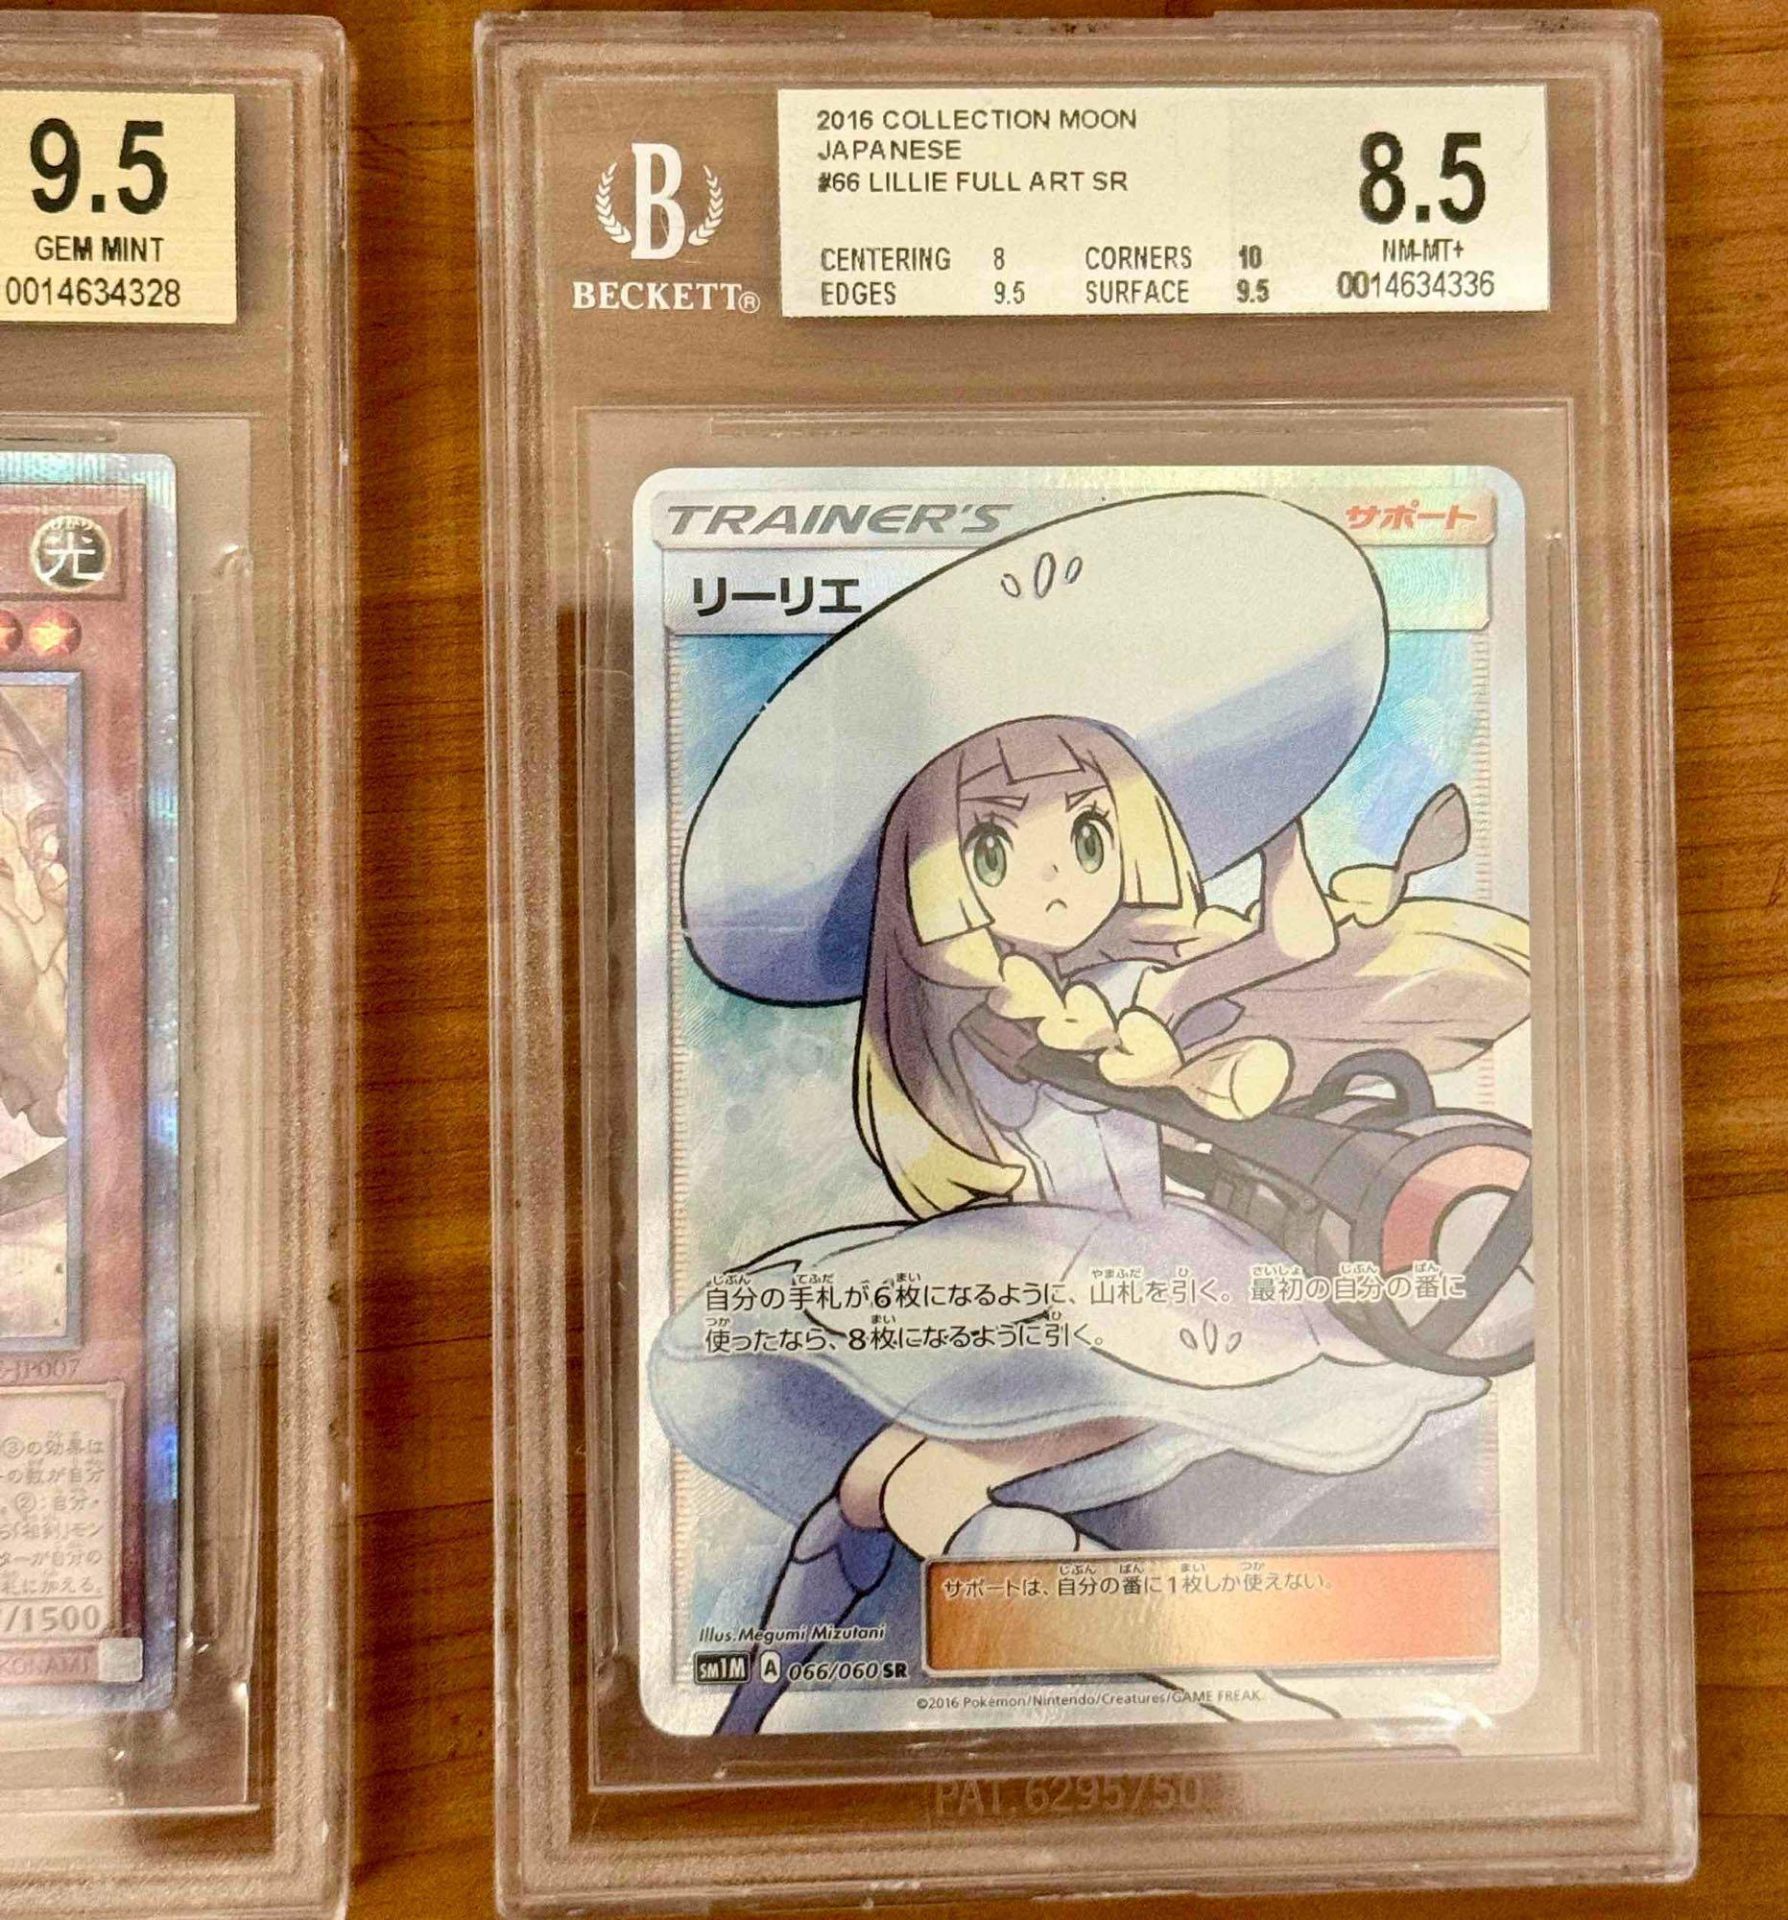 Two Graded Cards: 2021 Burst of Destiny Japanese Plus 1 Bonus Pack 9.5 Gem The Virtuous Prism and 20 - Image 3 of 4